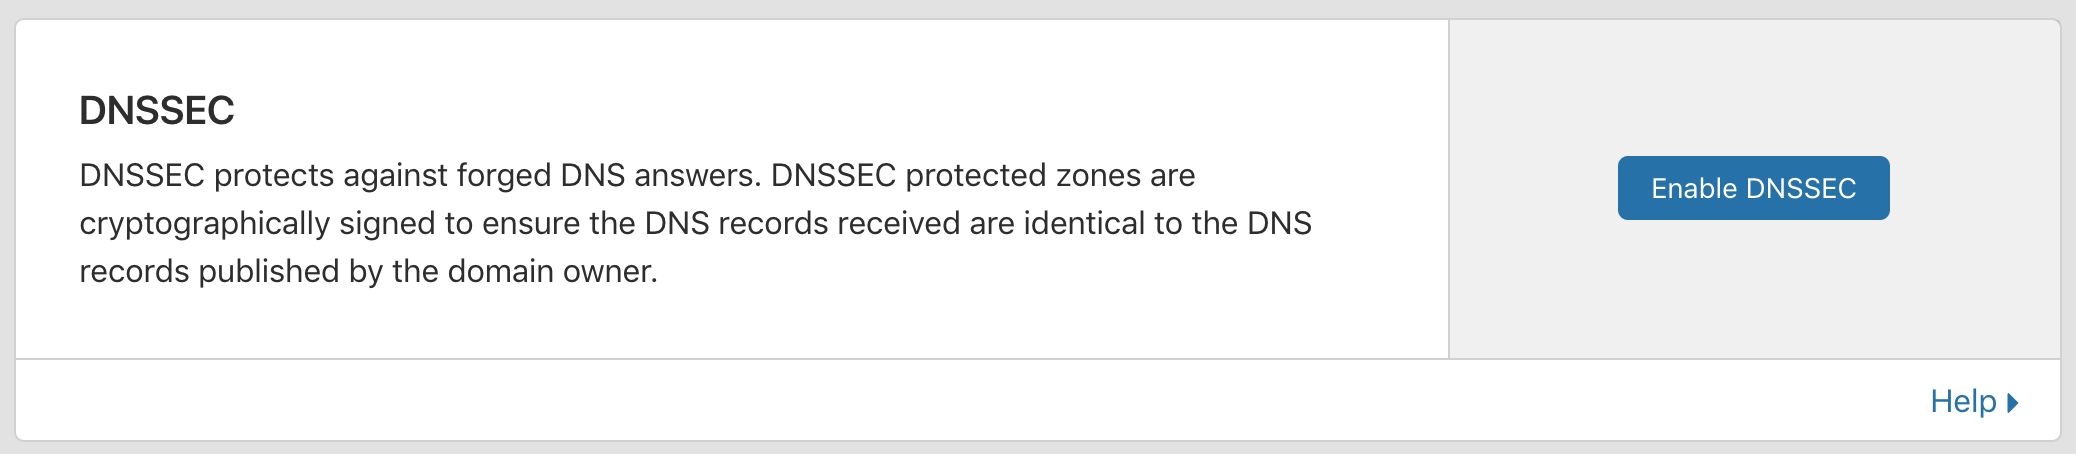 Interface to enable the DNSSEC option.